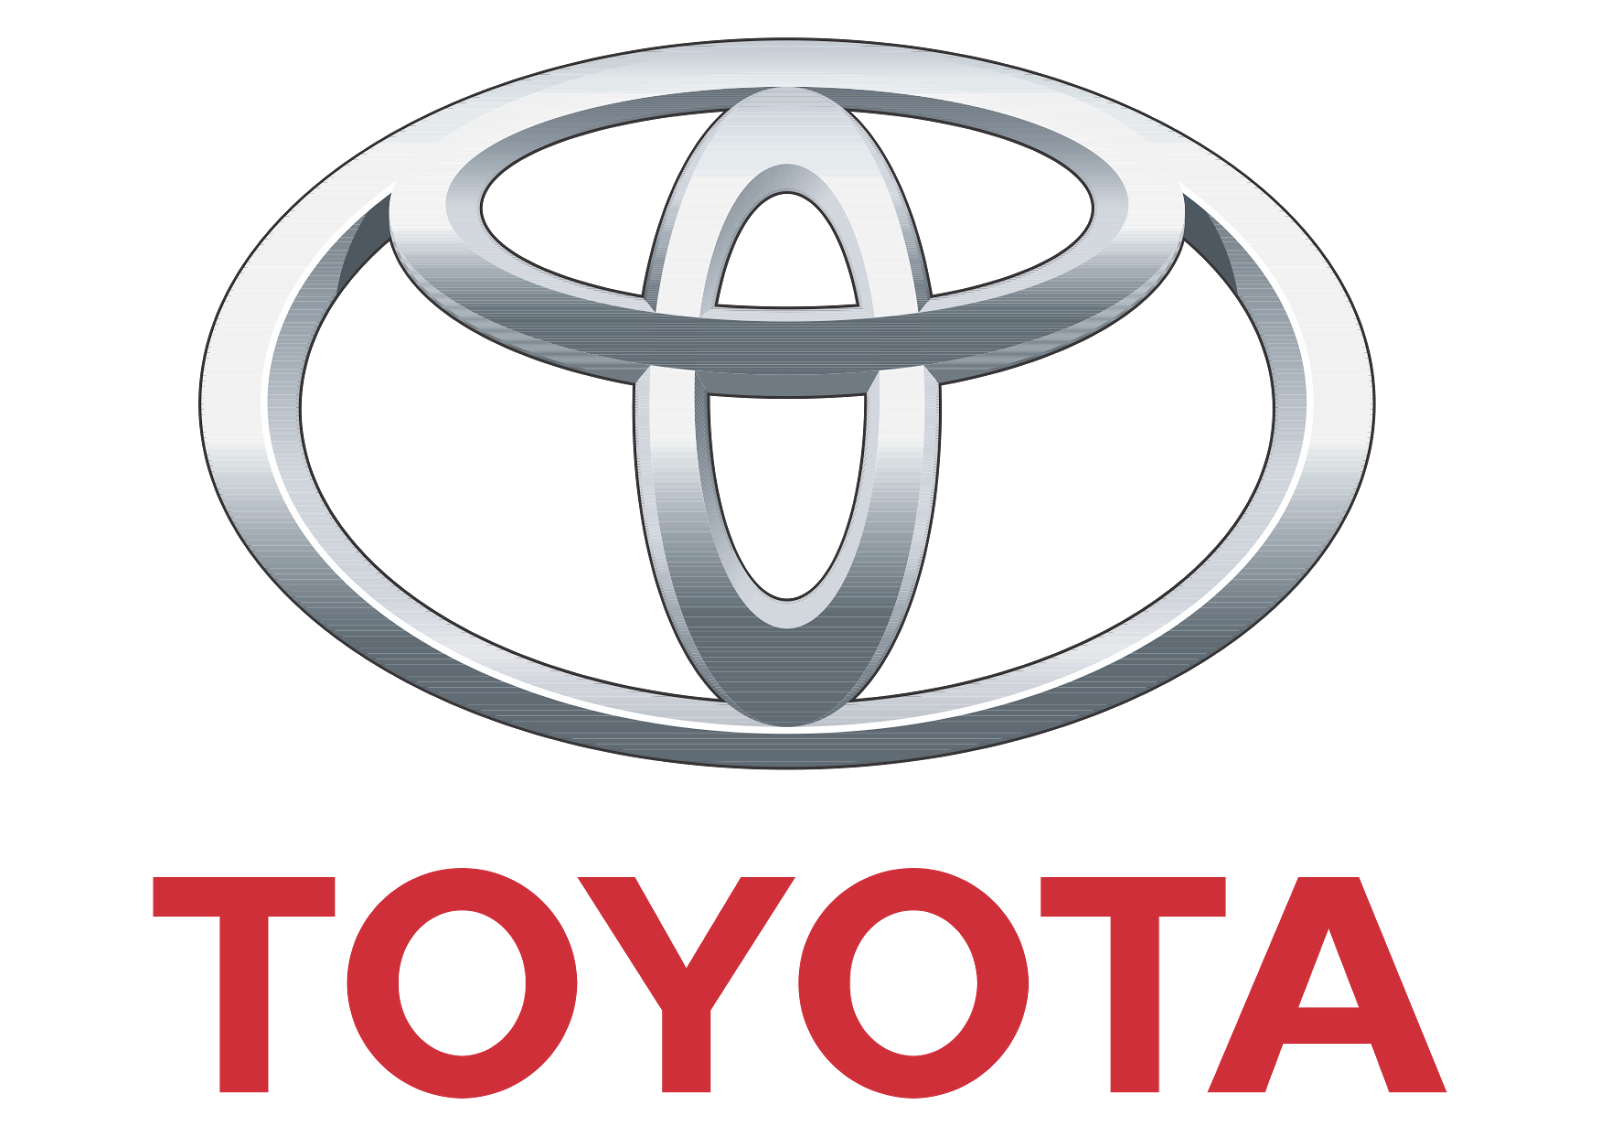 Toyota Logo PNG Transparent Images | PNG All